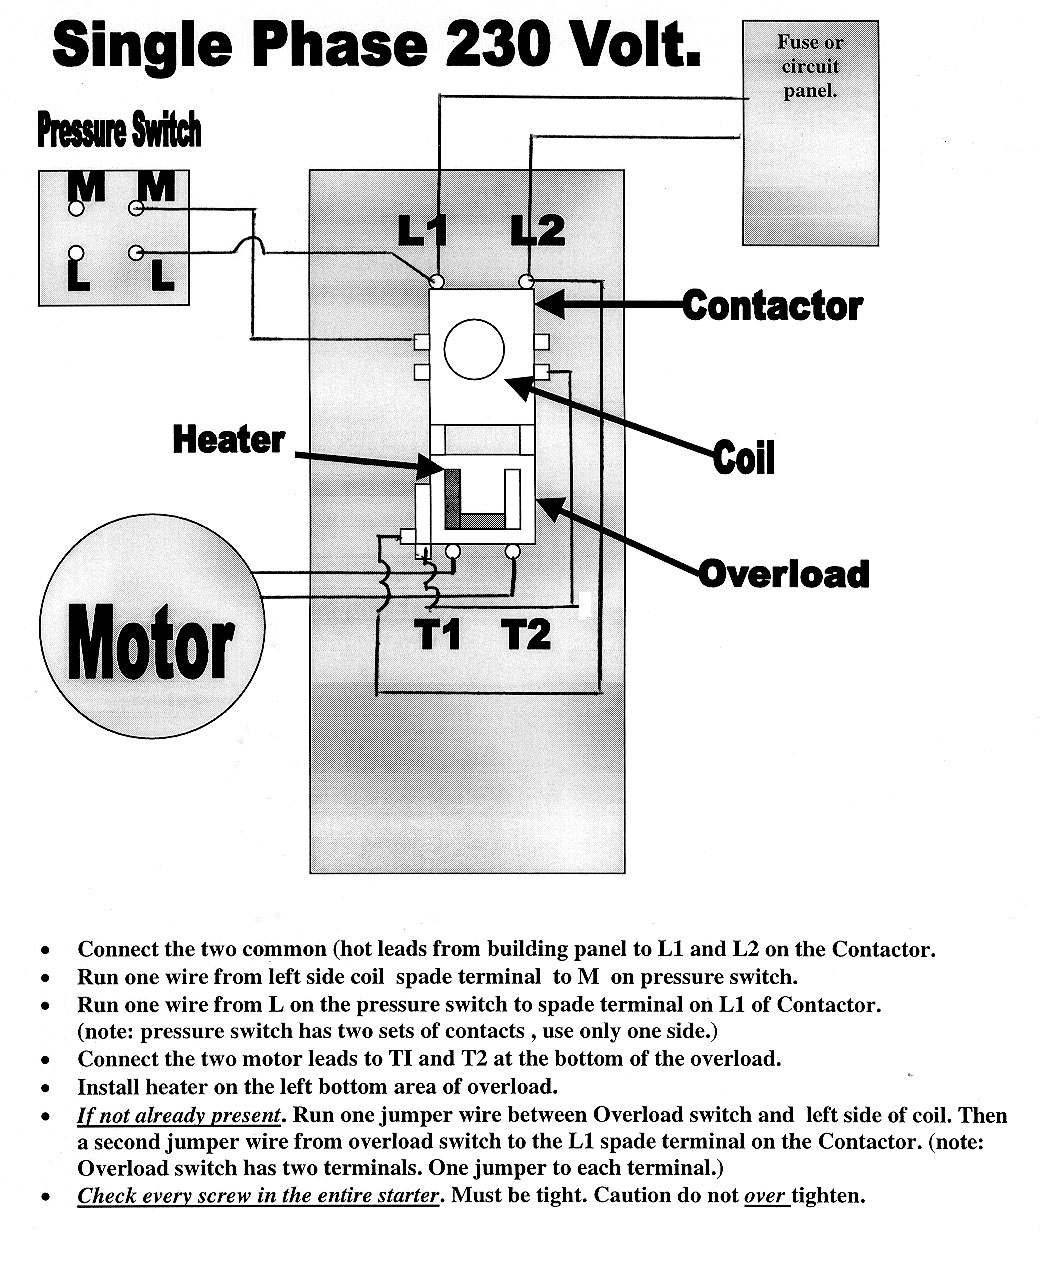 3 Phase 230 Volt Motor Wiring Diagram - All Wiring Diagram Data - 240 Volt Wiring Diagram